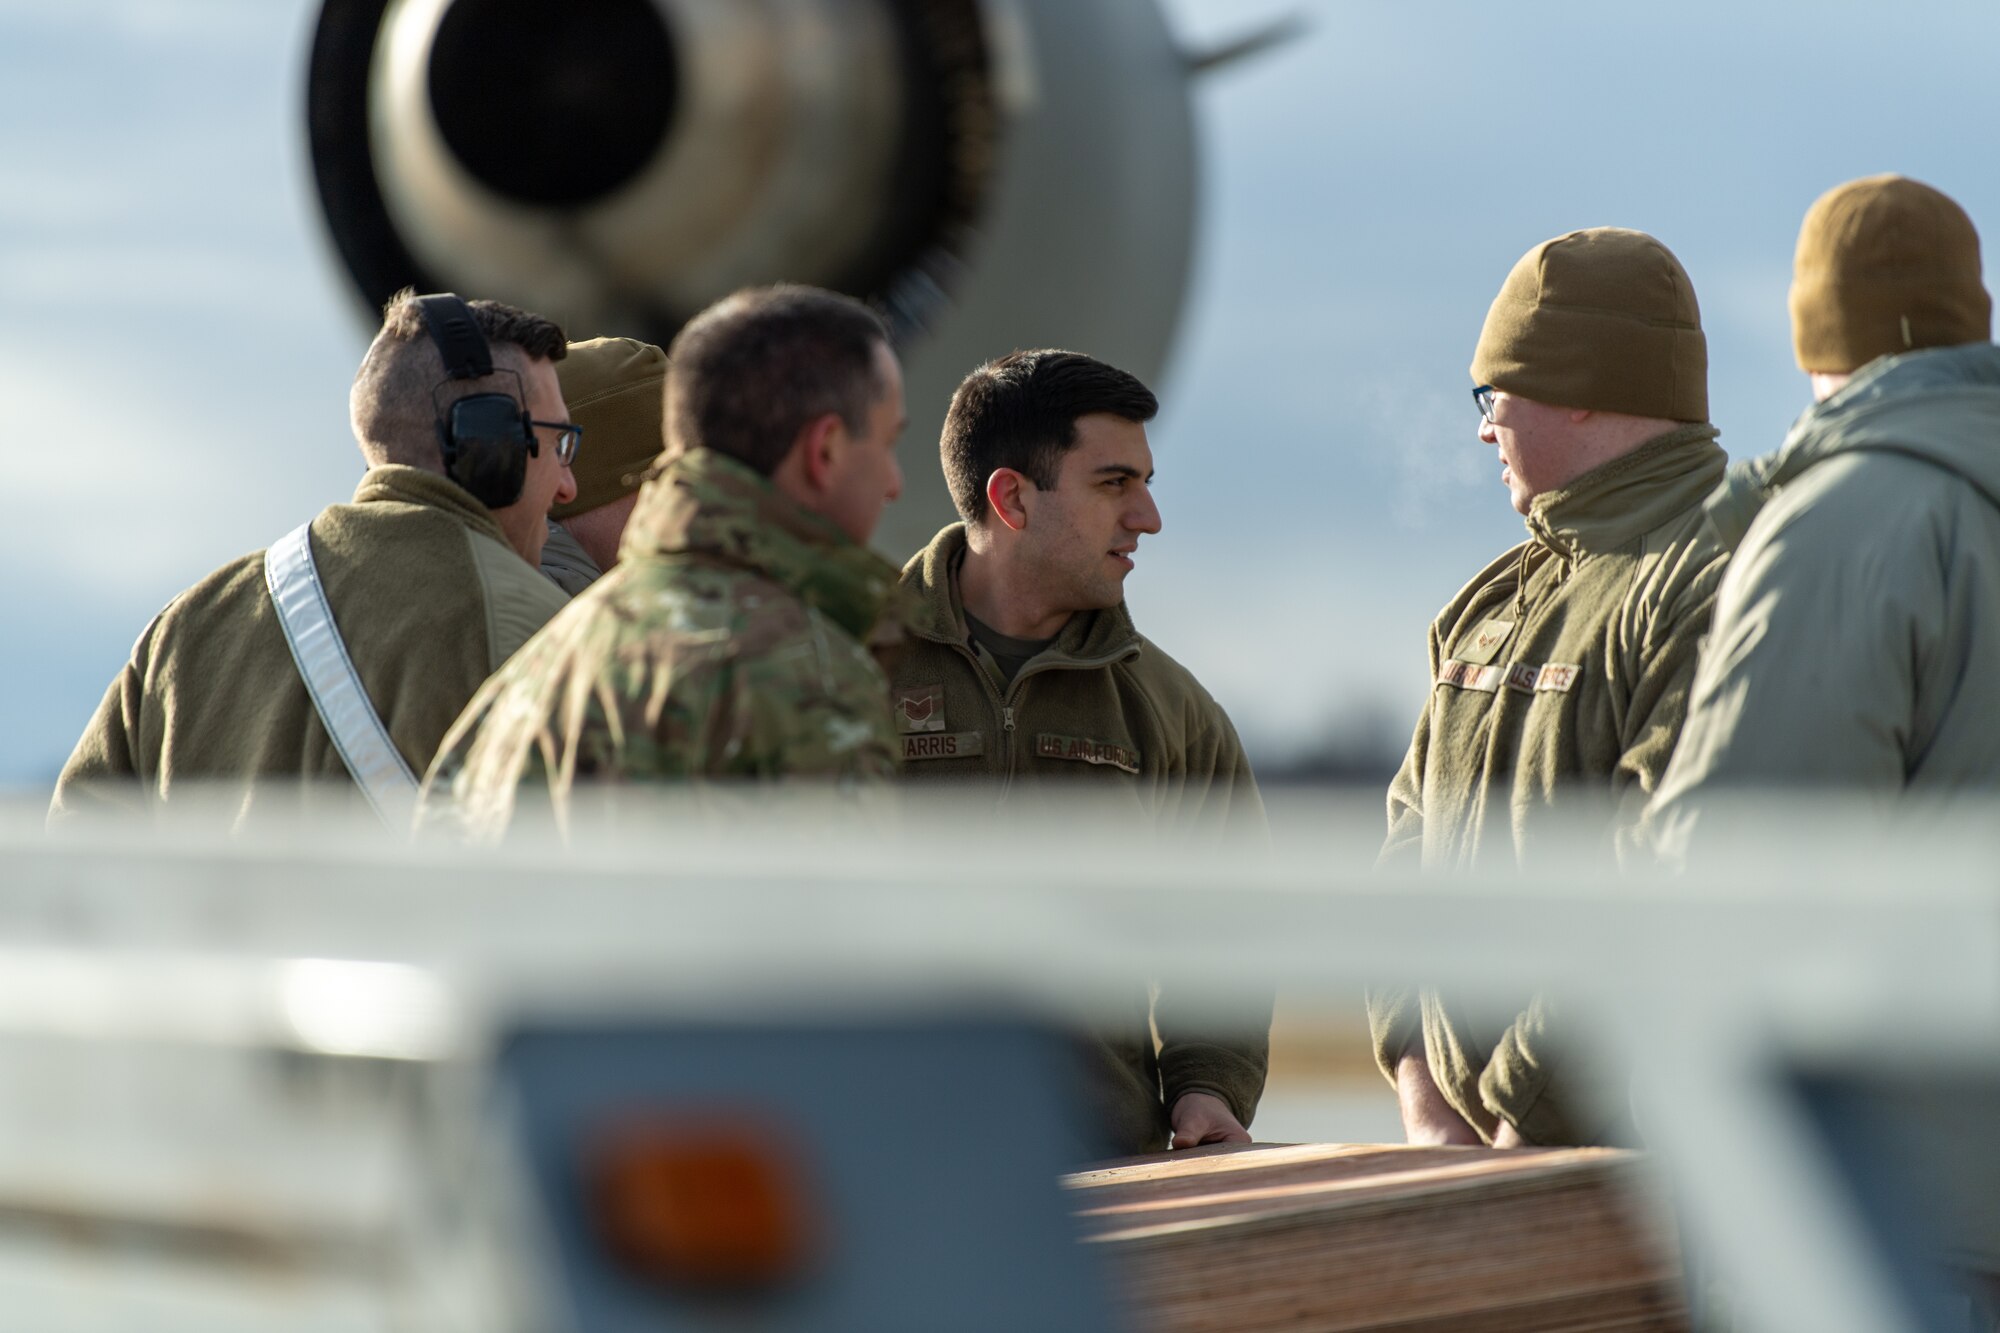 Photo of Airmen from the Vermont Air National Guard's 158th Aircraft Maintenance Squadron, along with Airmen from the New York ANG's 105th Airlift Wing, Stewart Air National Guard Base in Newburgh, New York, position wooden ramps to assist with loading equipment onto a C-17 Globemaster III aircraft at the Vermont Air National Guard Base, South Burlington, Vermont, Dec. 4, 2022.